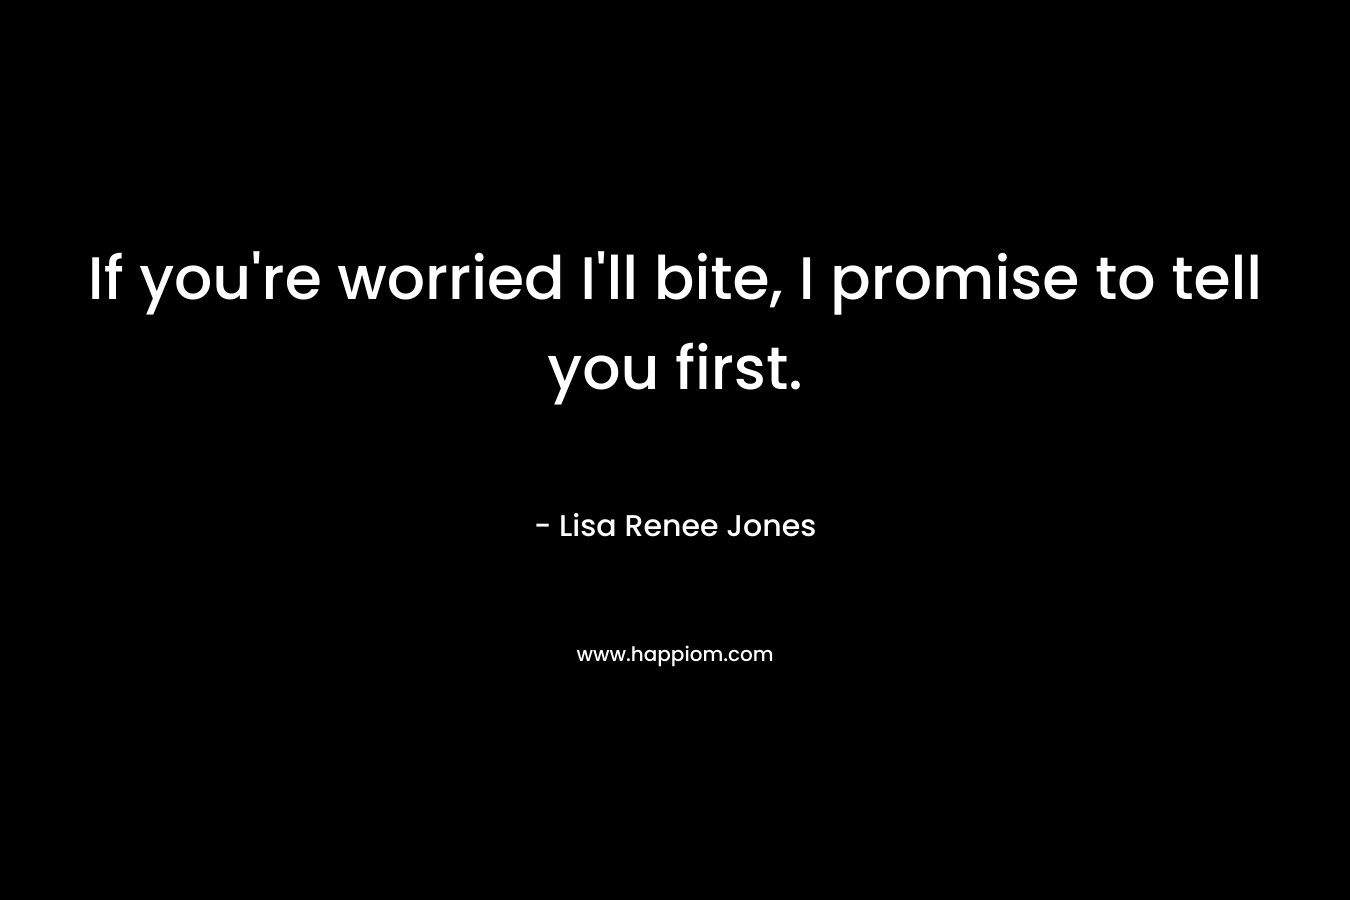 If you’re worried I’ll bite, I promise to tell you first. – Lisa Renee Jones